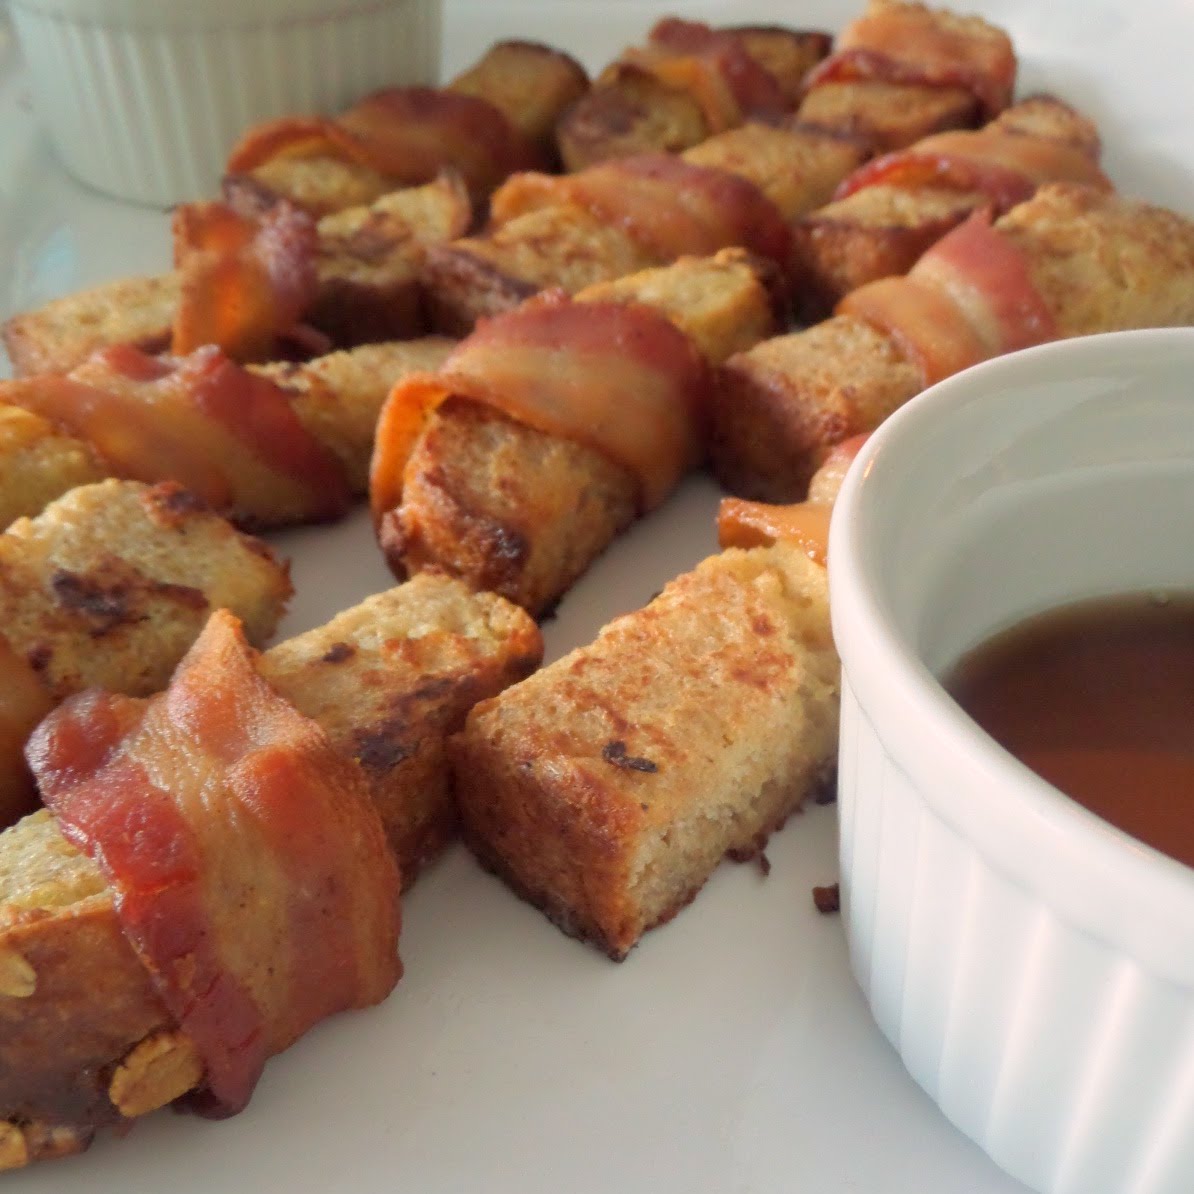 French Toast Bacon wrapped glizzy!! Did this last year and its